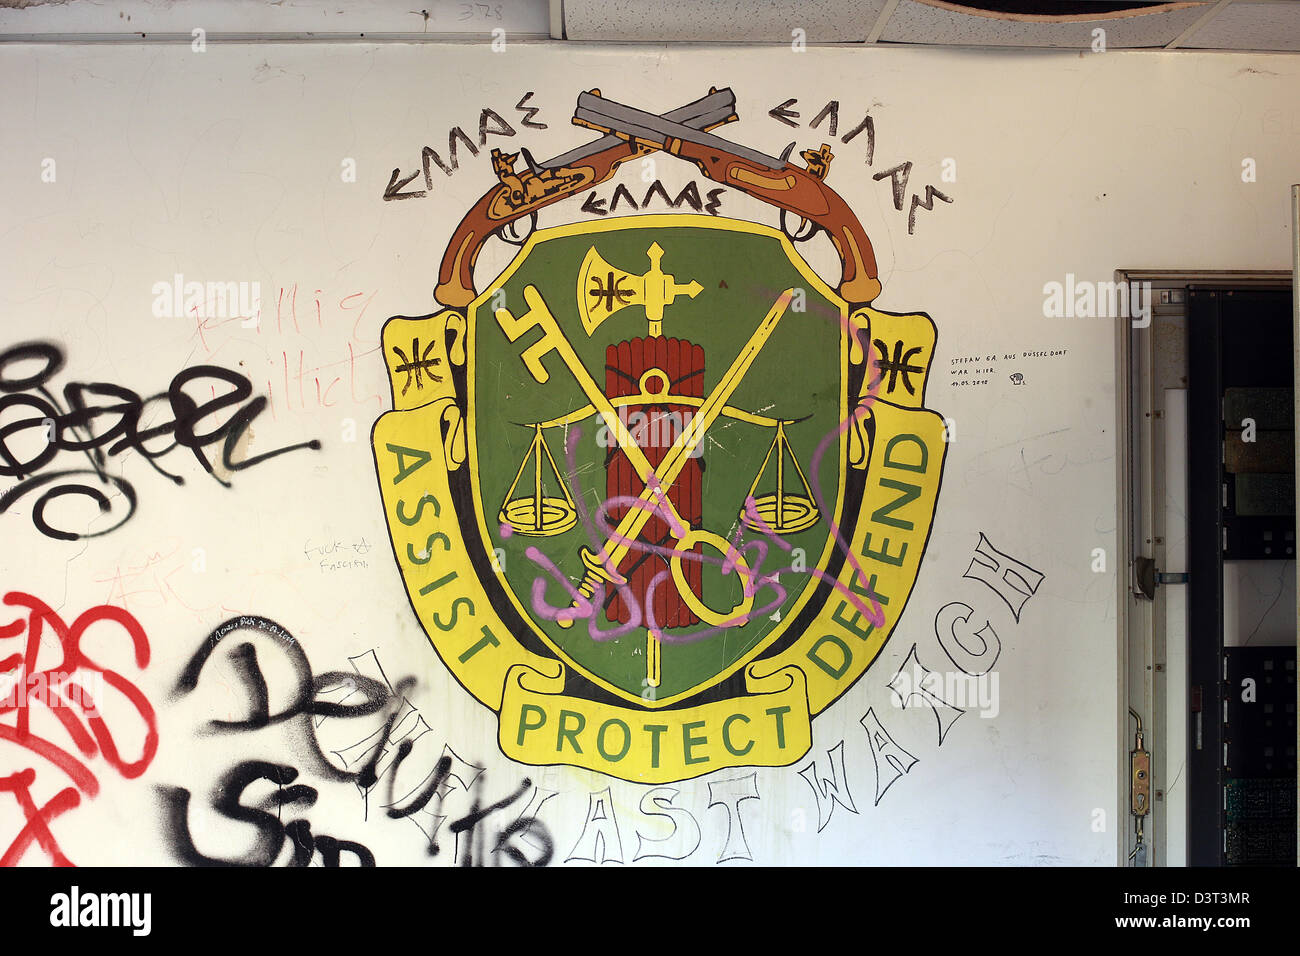 Berlin, Germany, coat of arms of the U.S. military police and graffiti on the wall Stock Photo